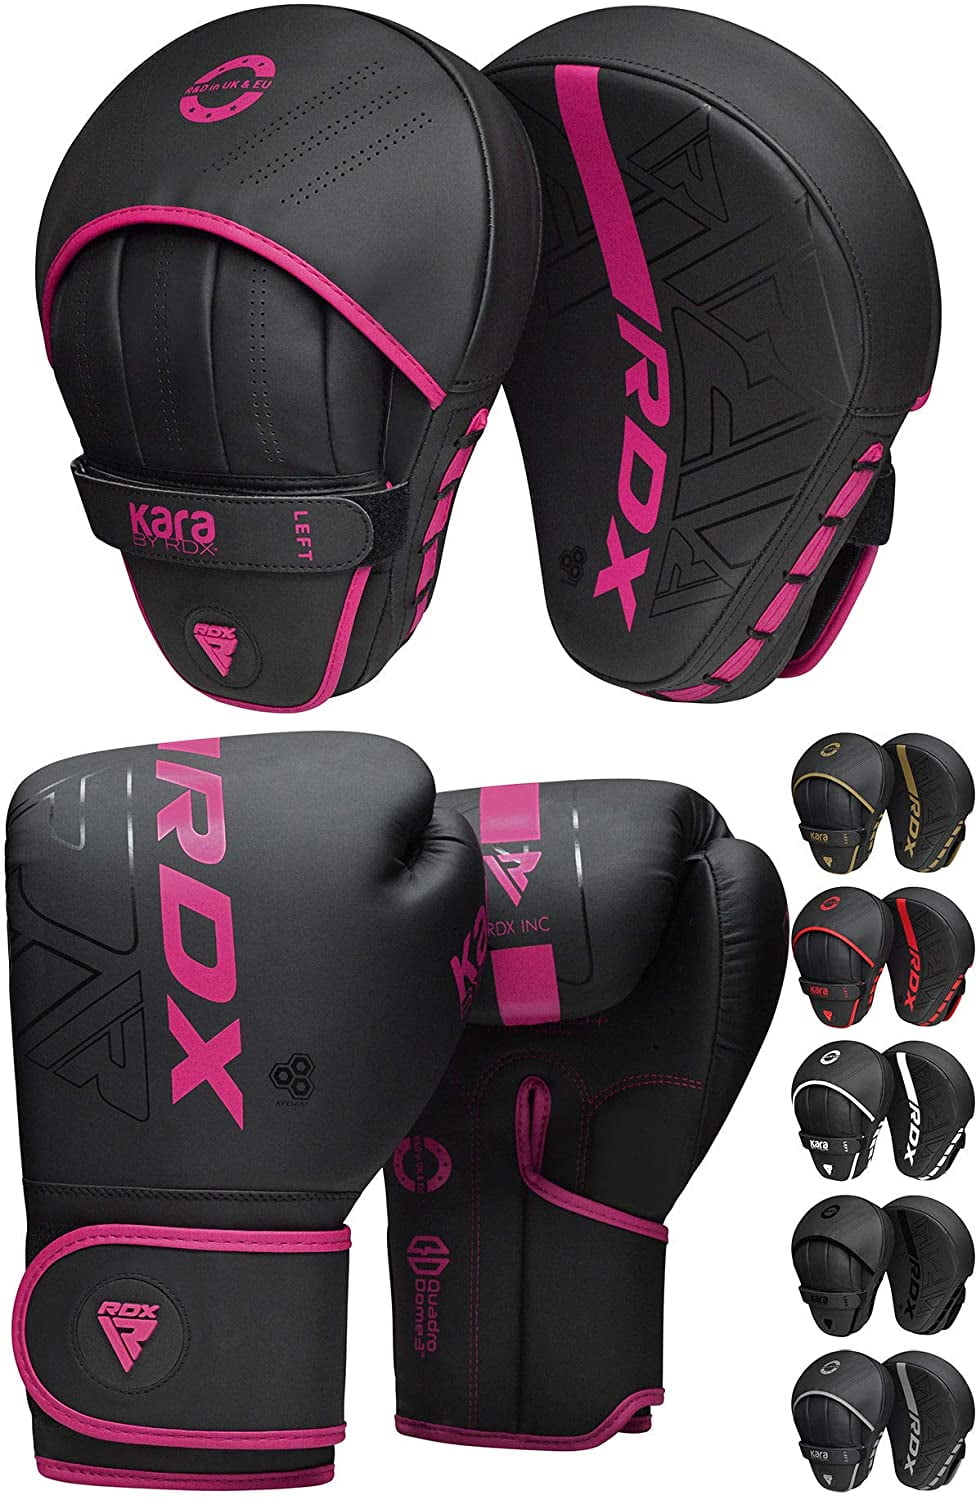 Focus Pads and Boxing Gloves Set Hook & Jabs Mitts MMA Fight Punching Focus Pads 